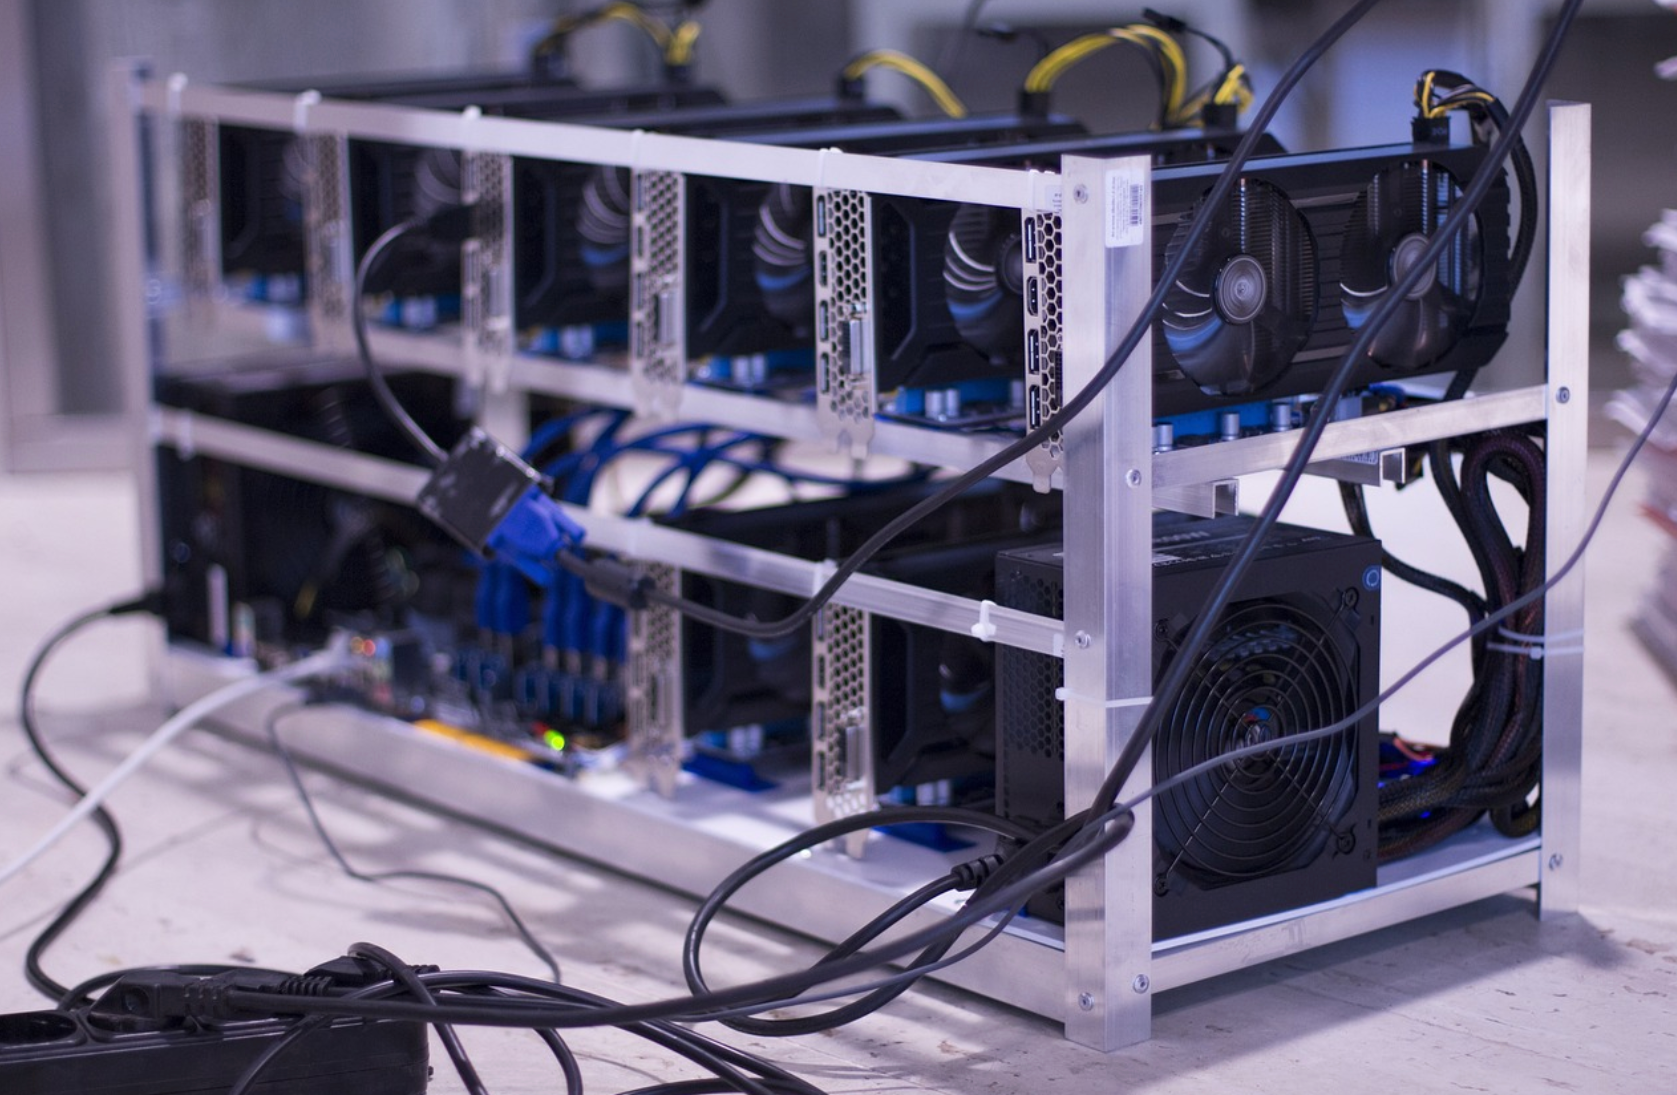 With A Growing Short Supply Of Crypto Mining Infrastructure, Can Mawson's Large-Scale Excess Capacity Provide Hope For The Industry?